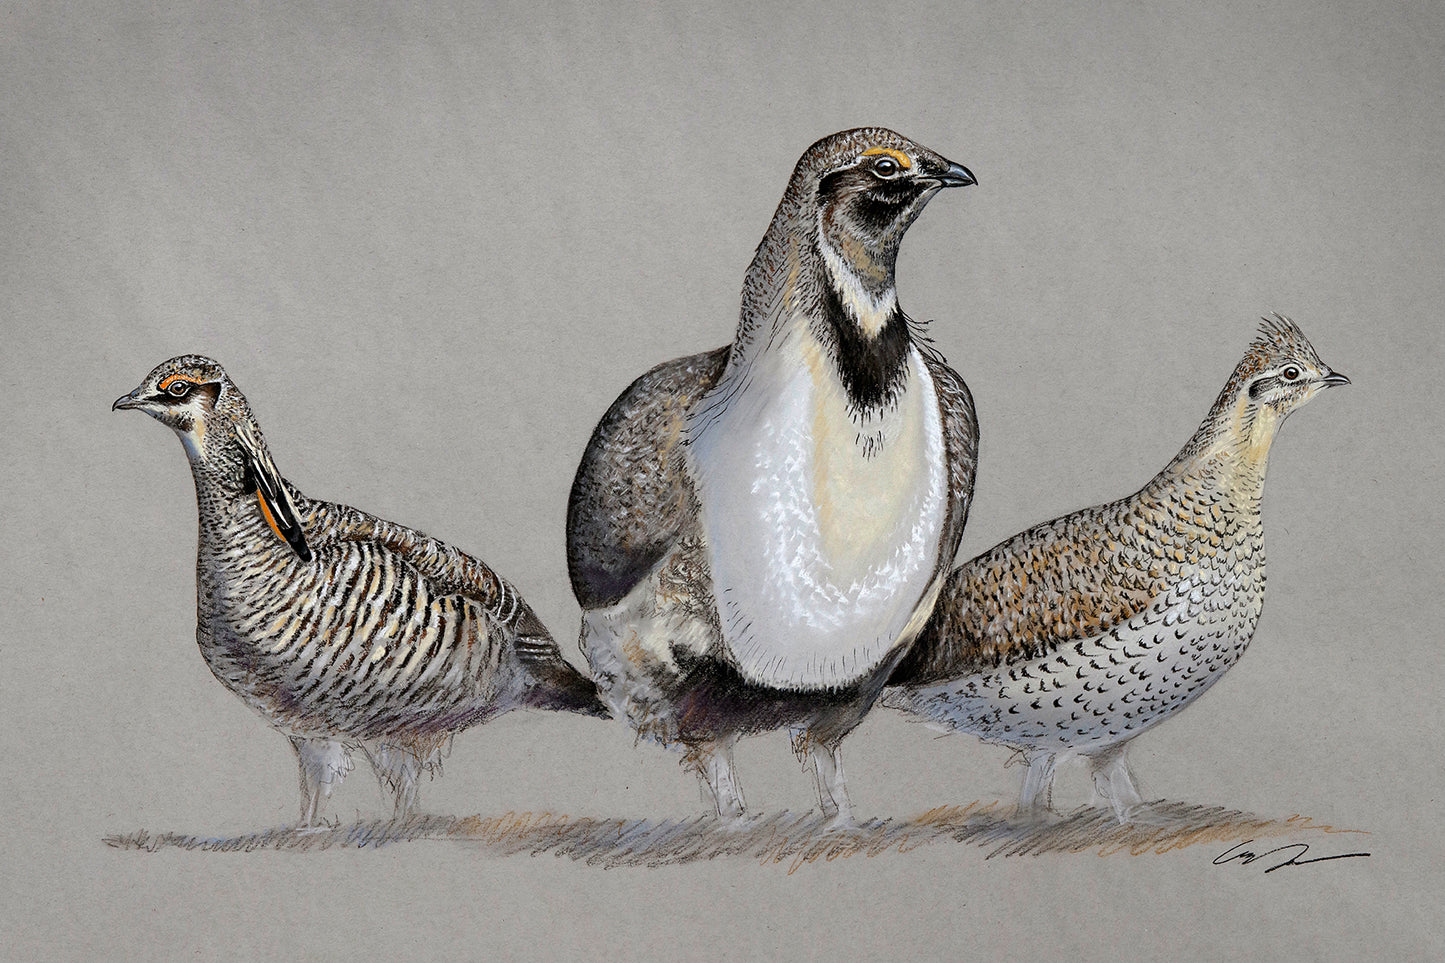 A full color pastel drawing of three different grouse